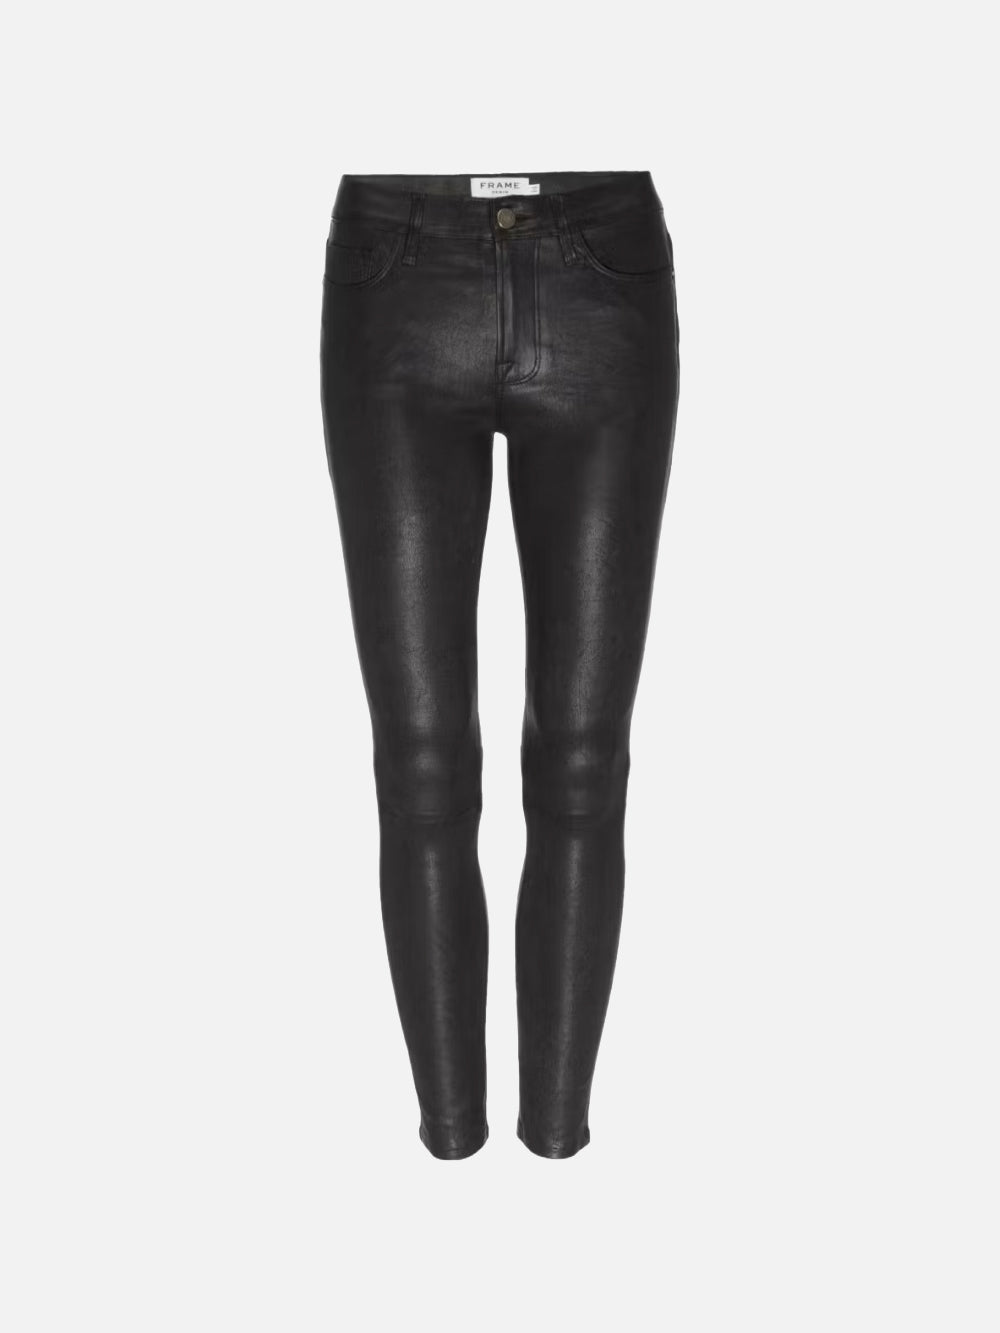 Faux Leather Slim Pants for Tall Women in Black 34 / 35 / Black